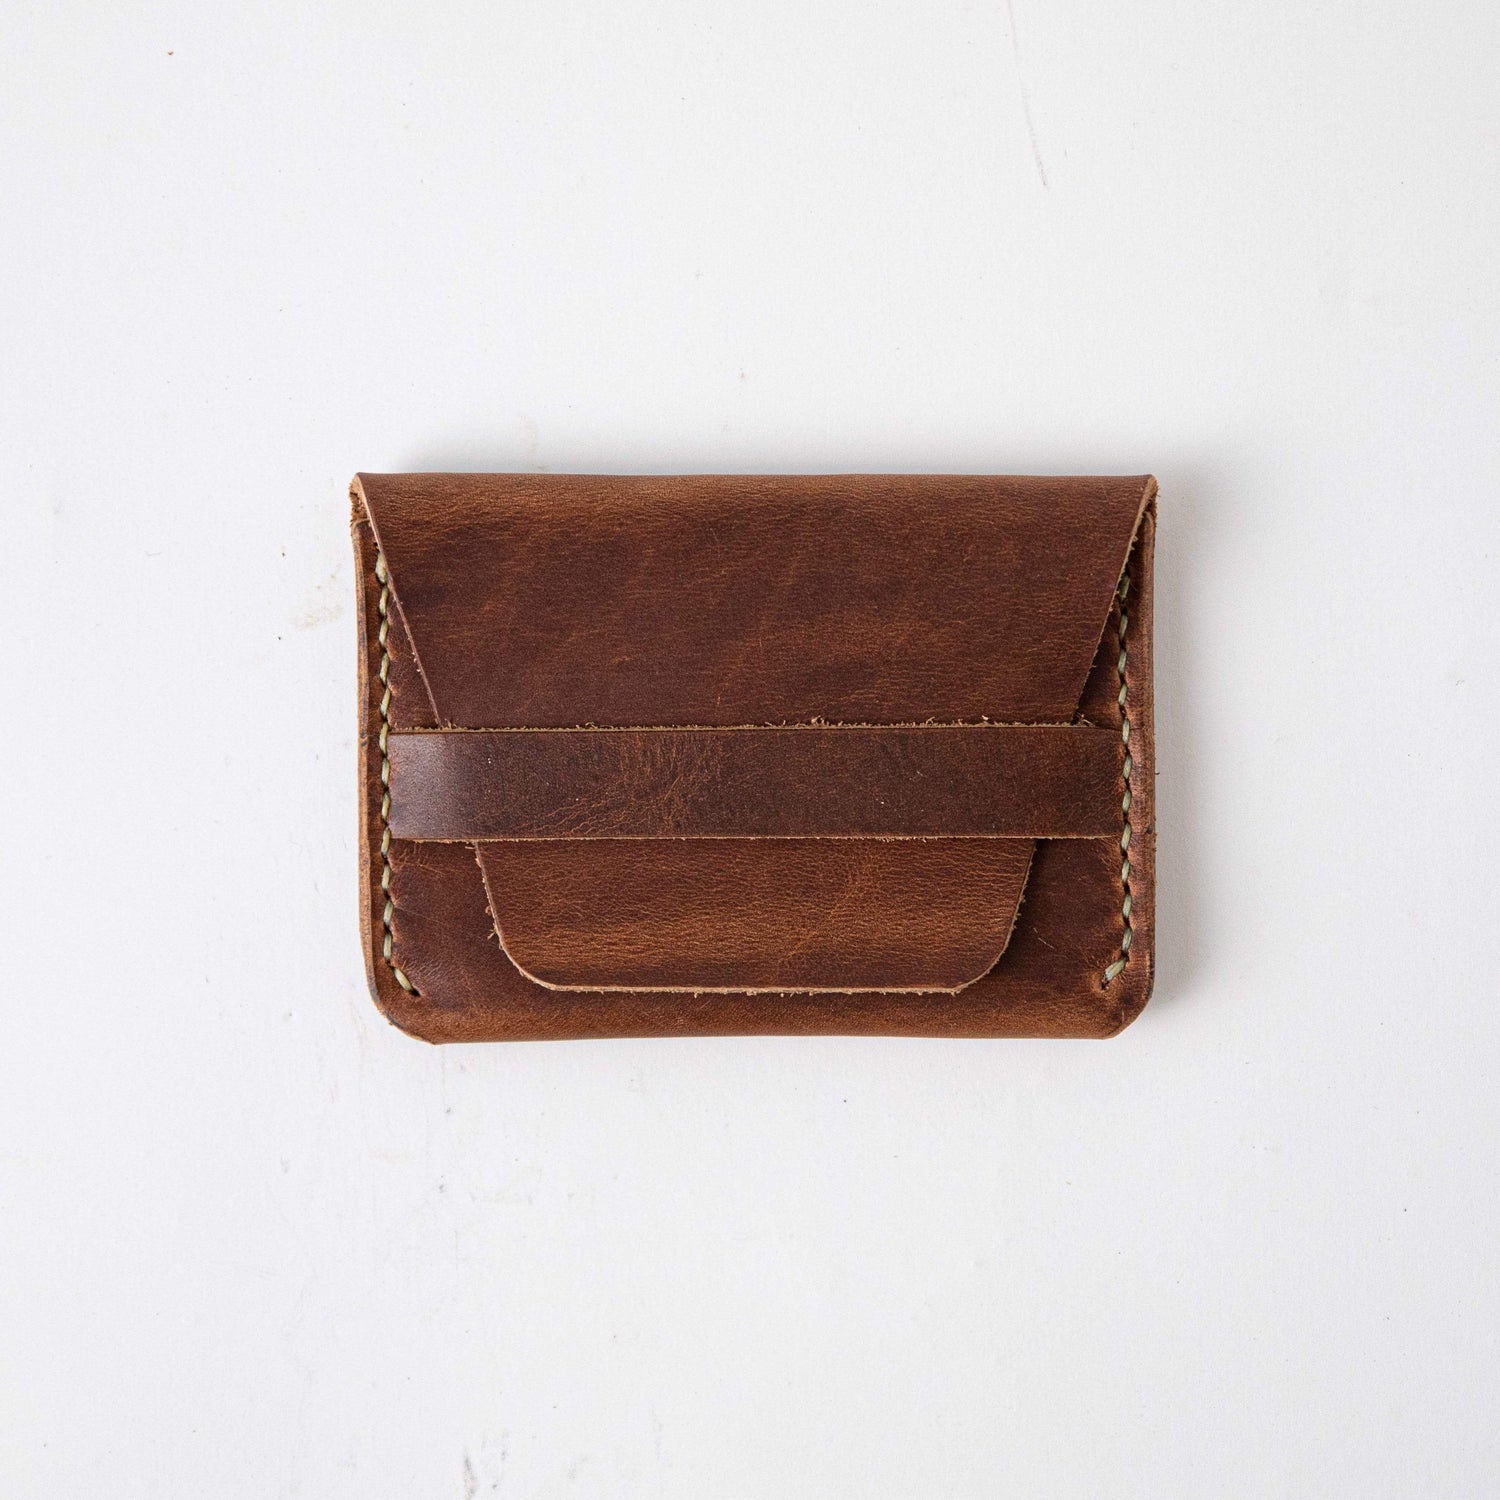 Mens Bifold Leather Wallet - Handcrafted in the USA